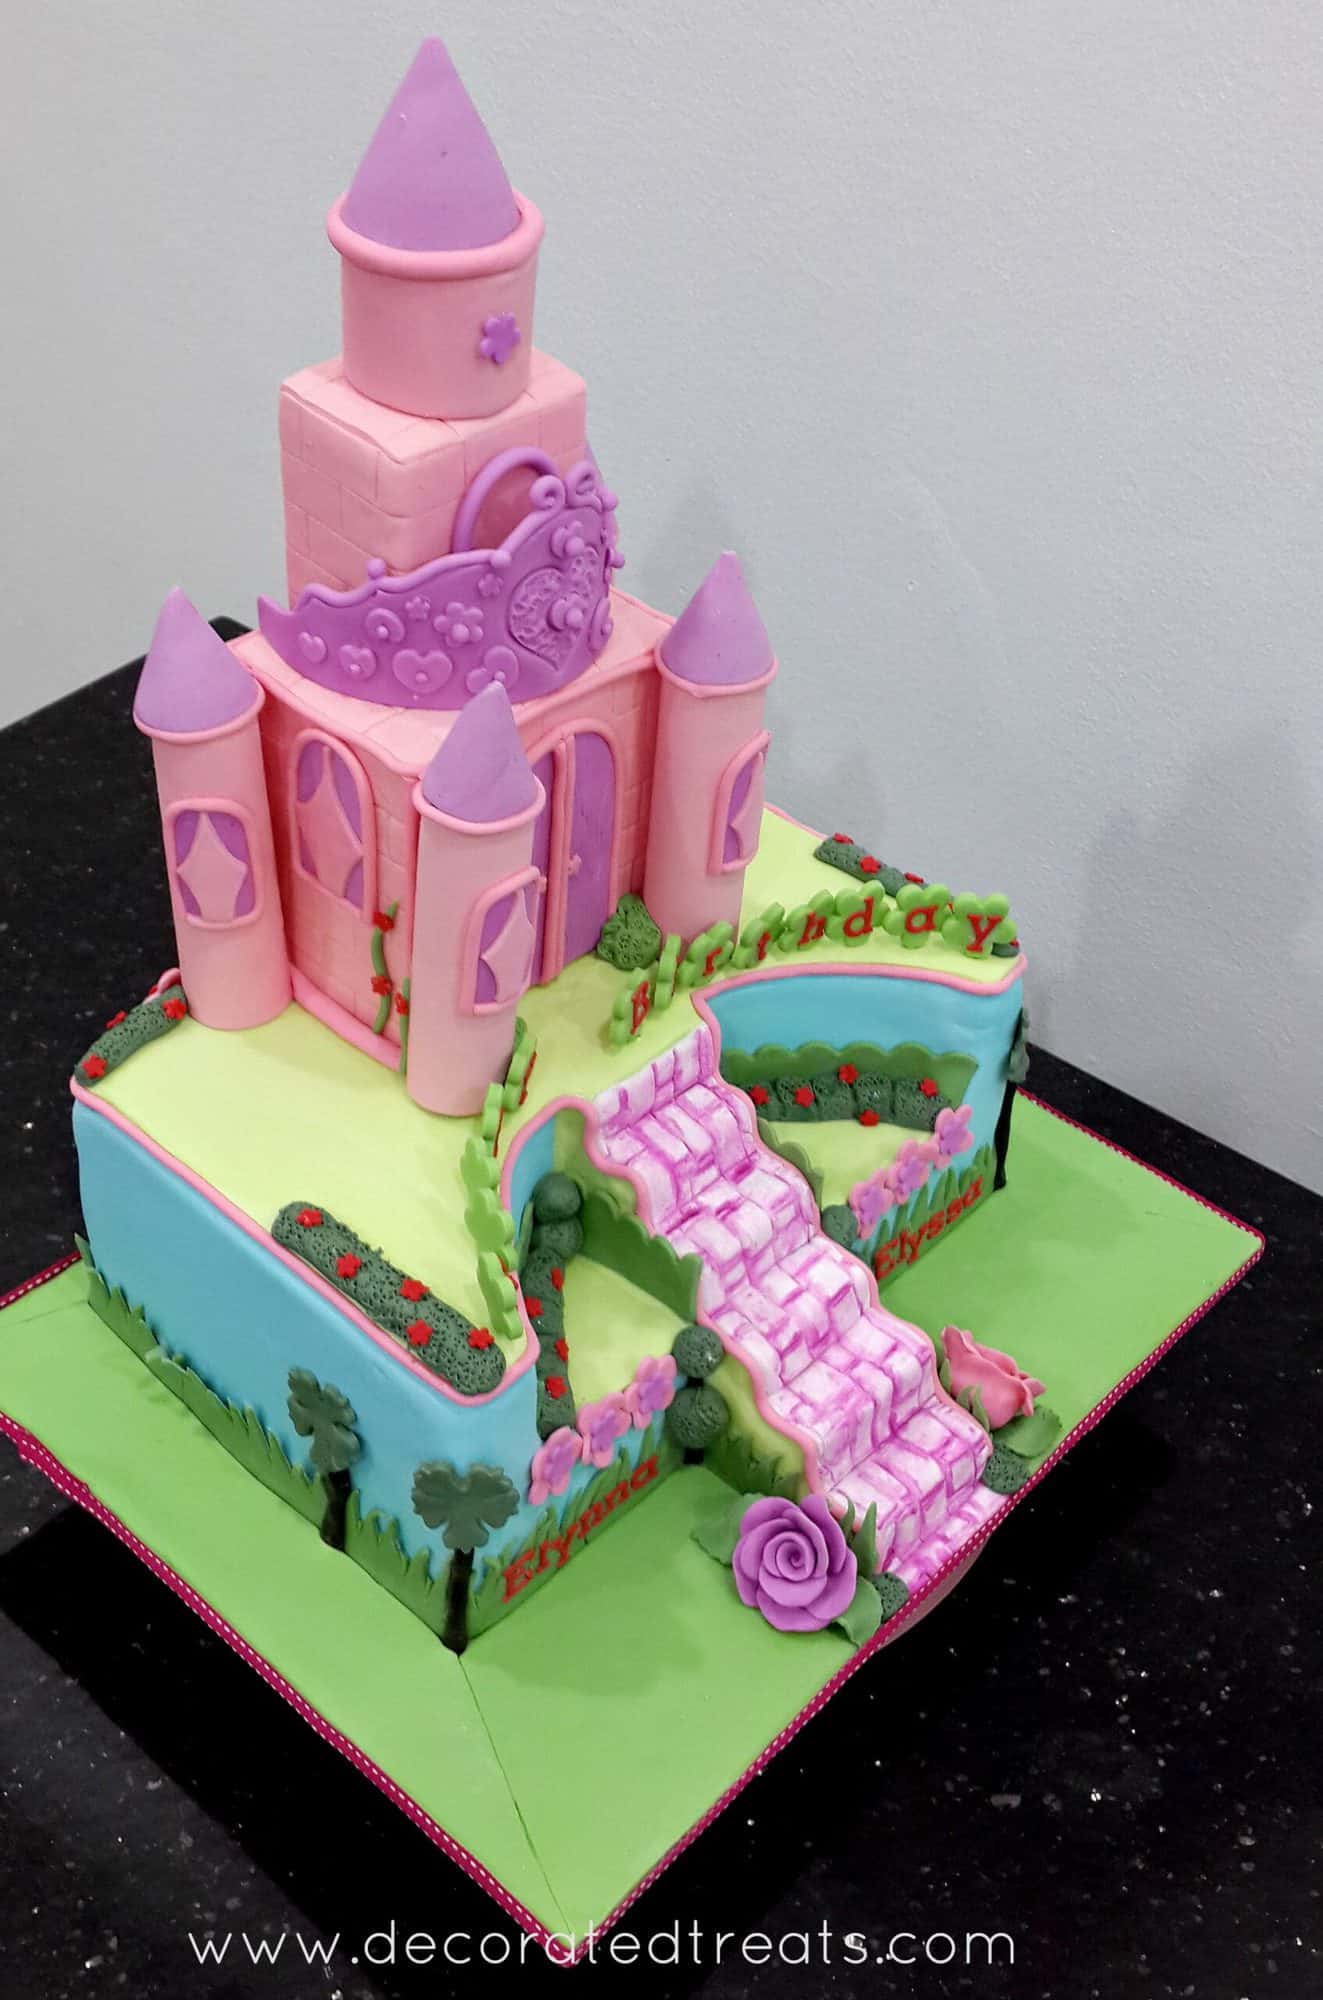 A rectangle cake with a pink castle cake topper.